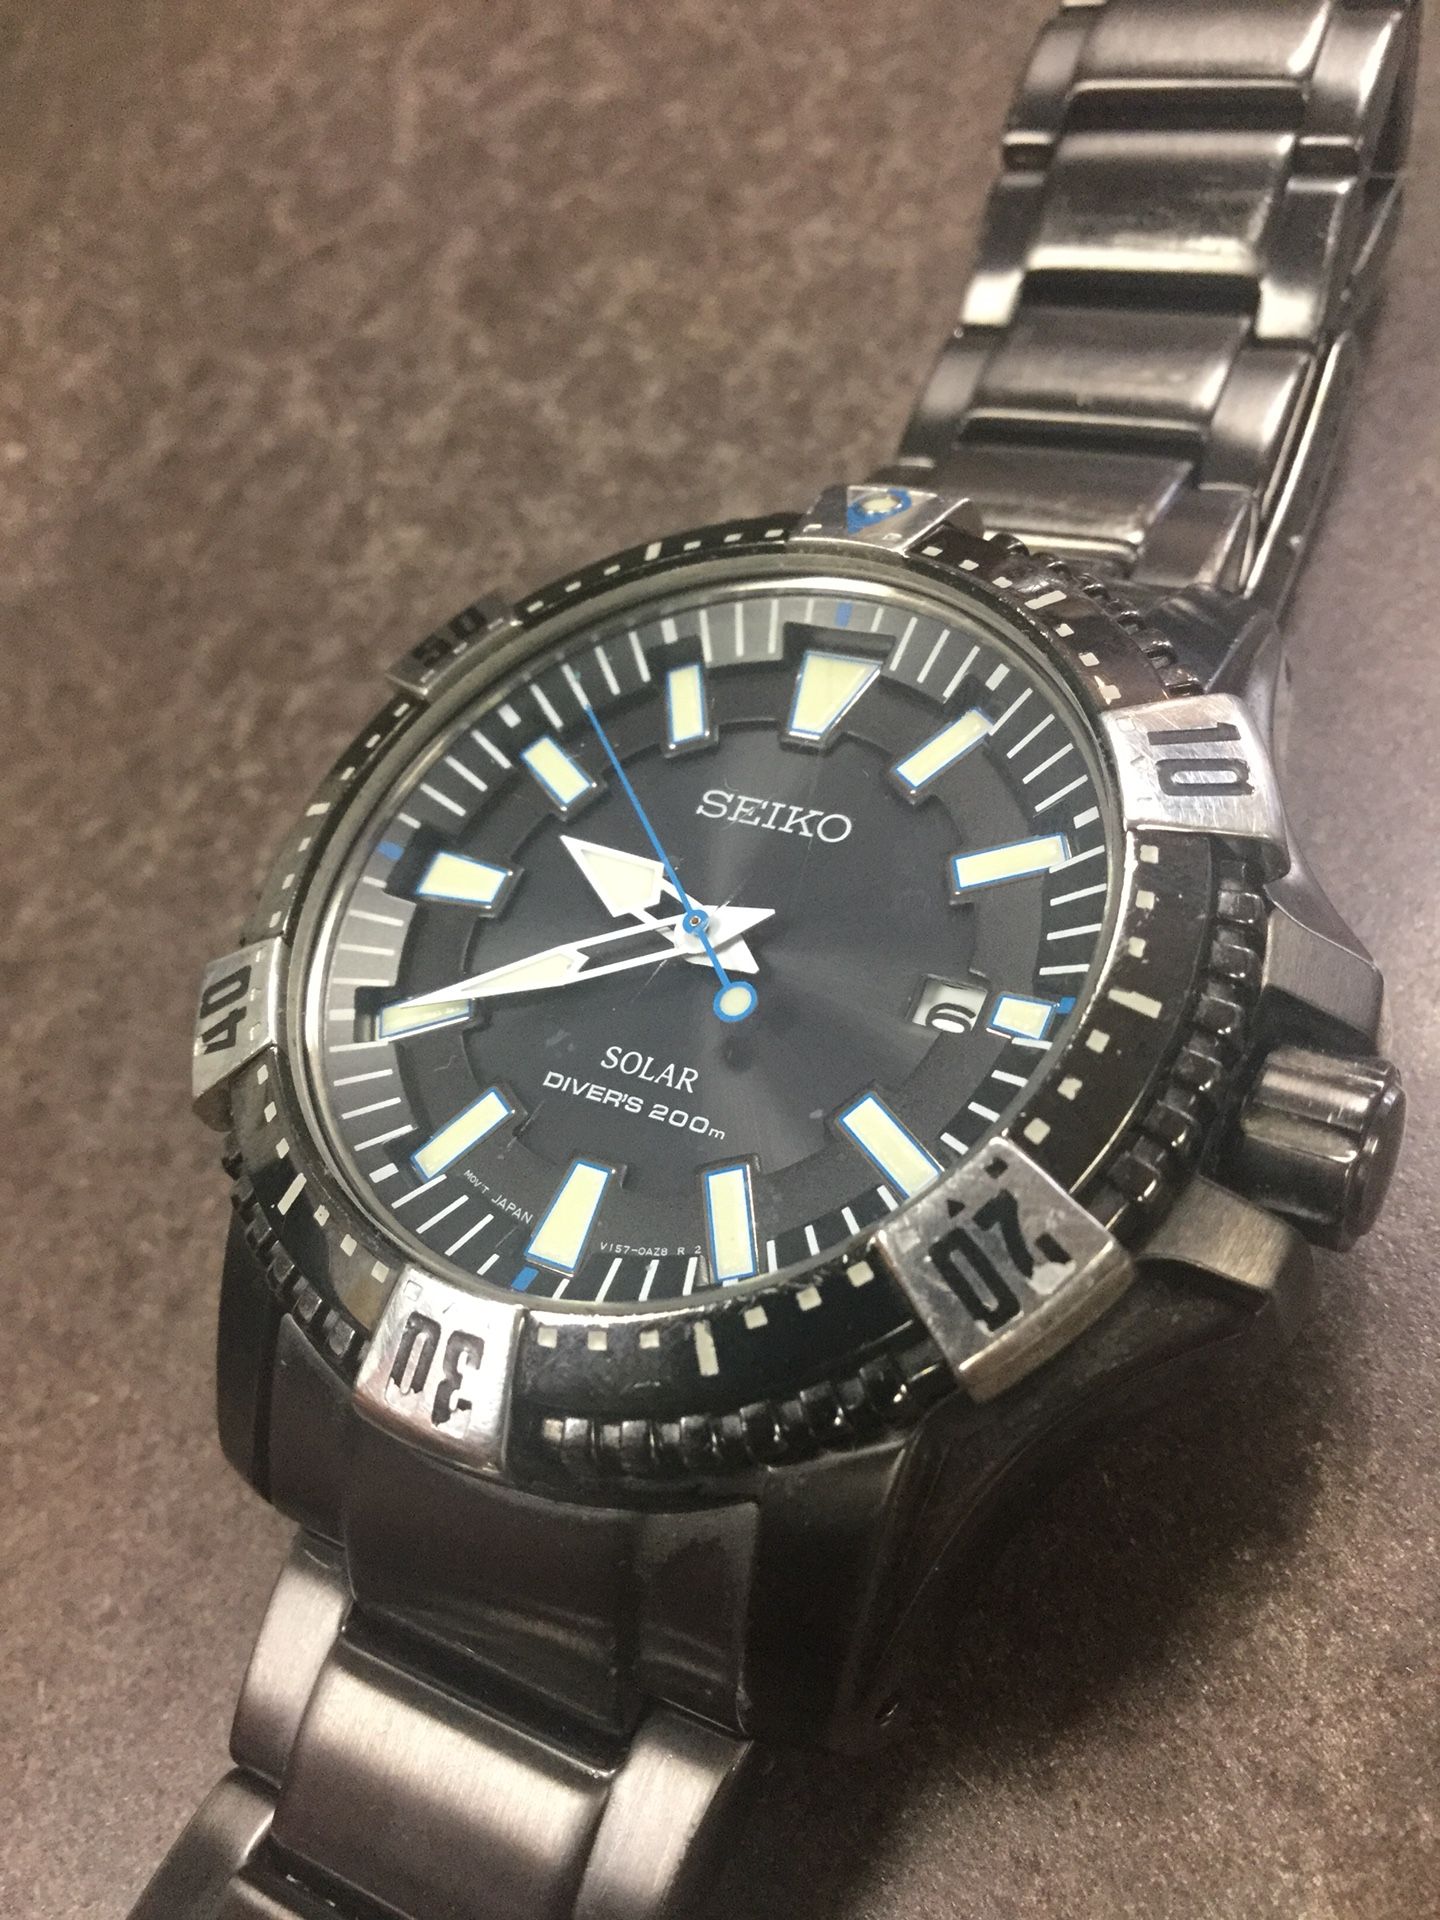 SEIKO SOLAR AIR DIVER'S 200m - MODEL NO. V157-0AS0 for Sale in Norwalk, CA  - OfferUp